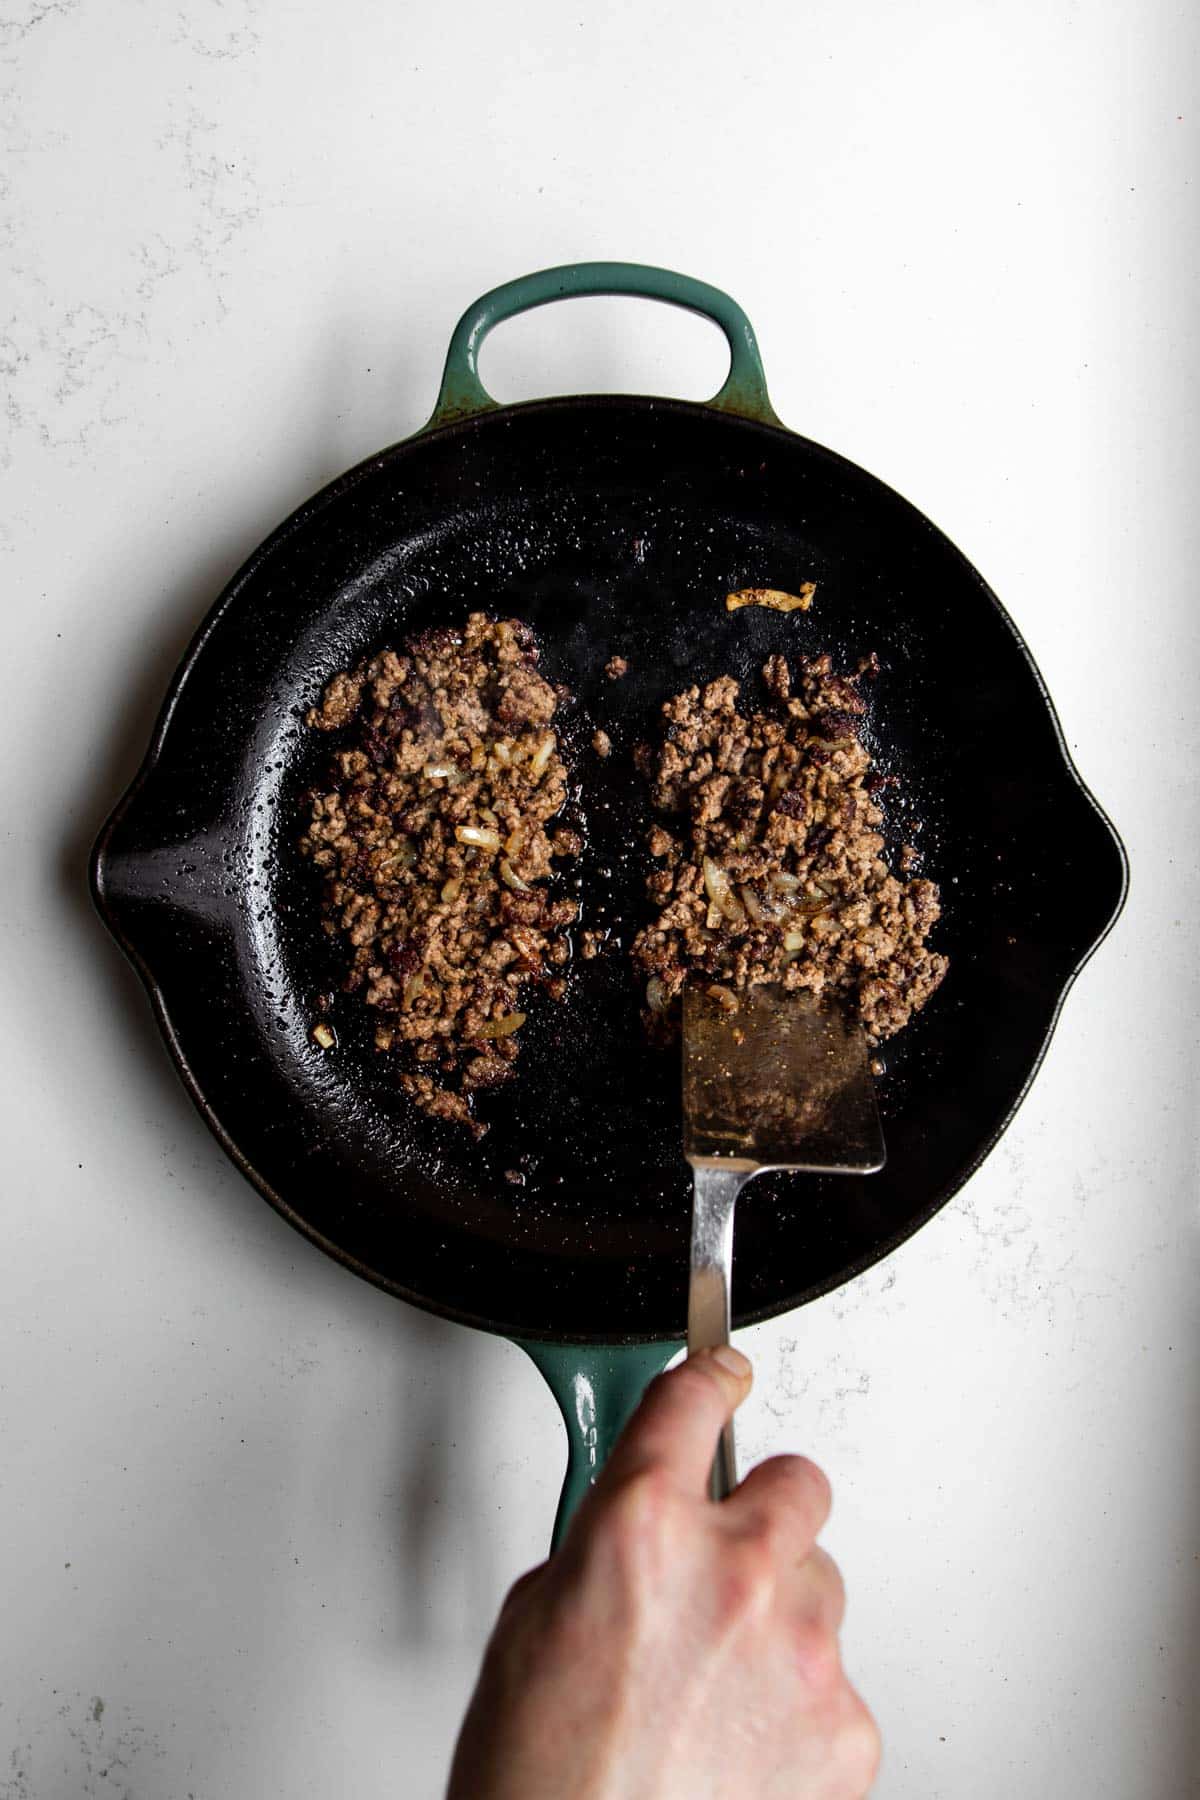 Metal spatula chopping the ground beef and onion in a cast iron skillet.